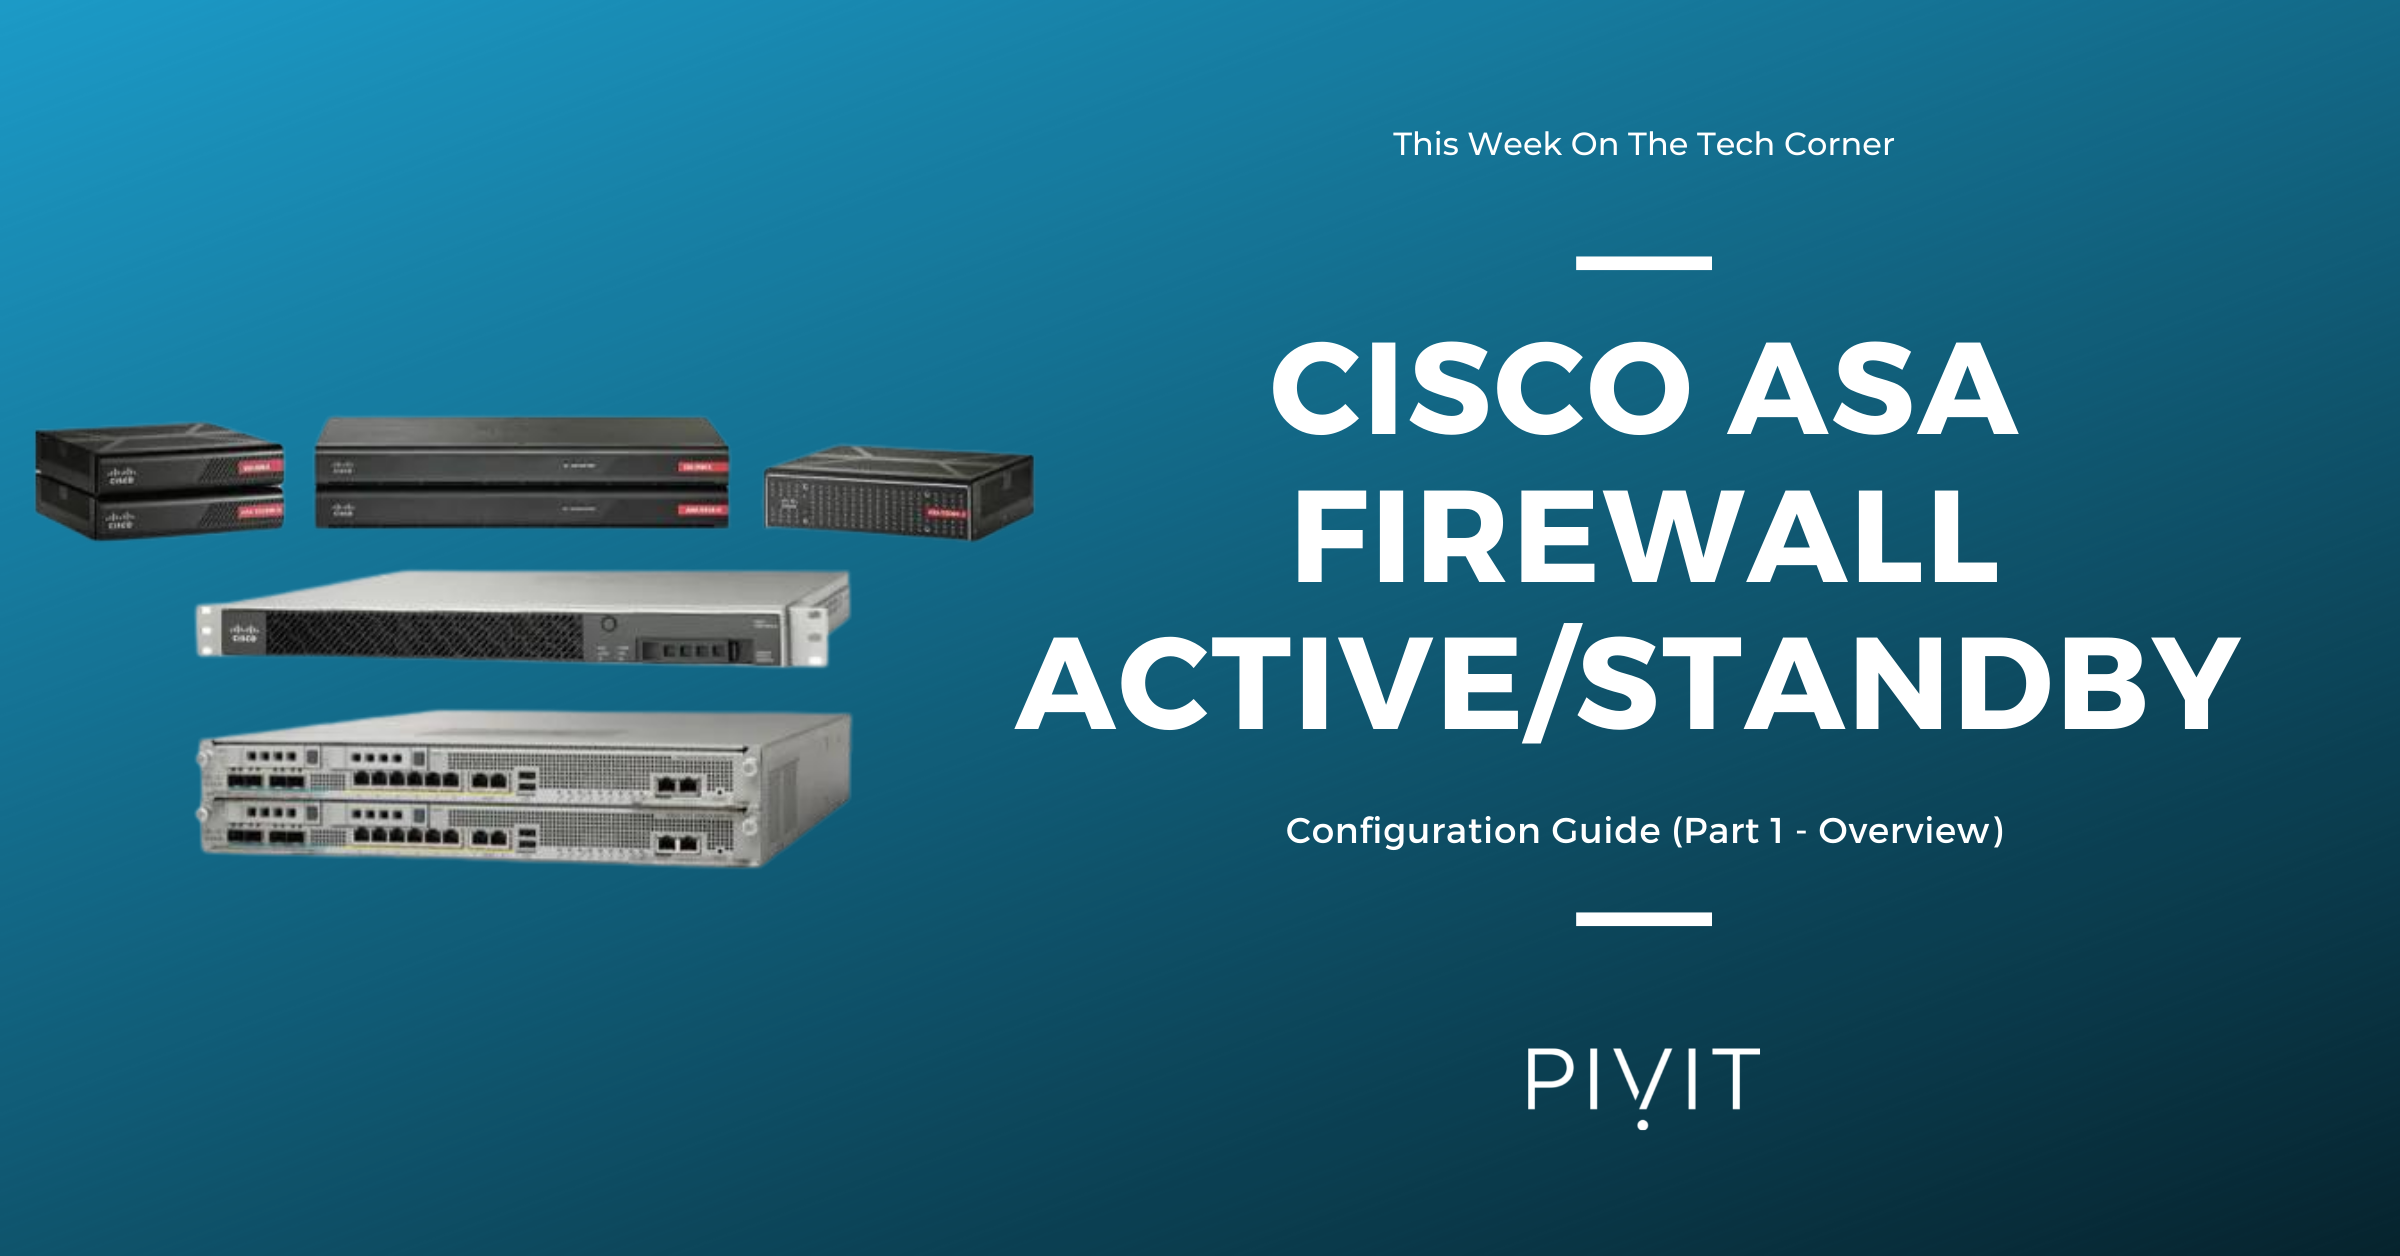 Cisco ASA Firewall Active/Standby Configuration Guide (Part 1 - Overview)